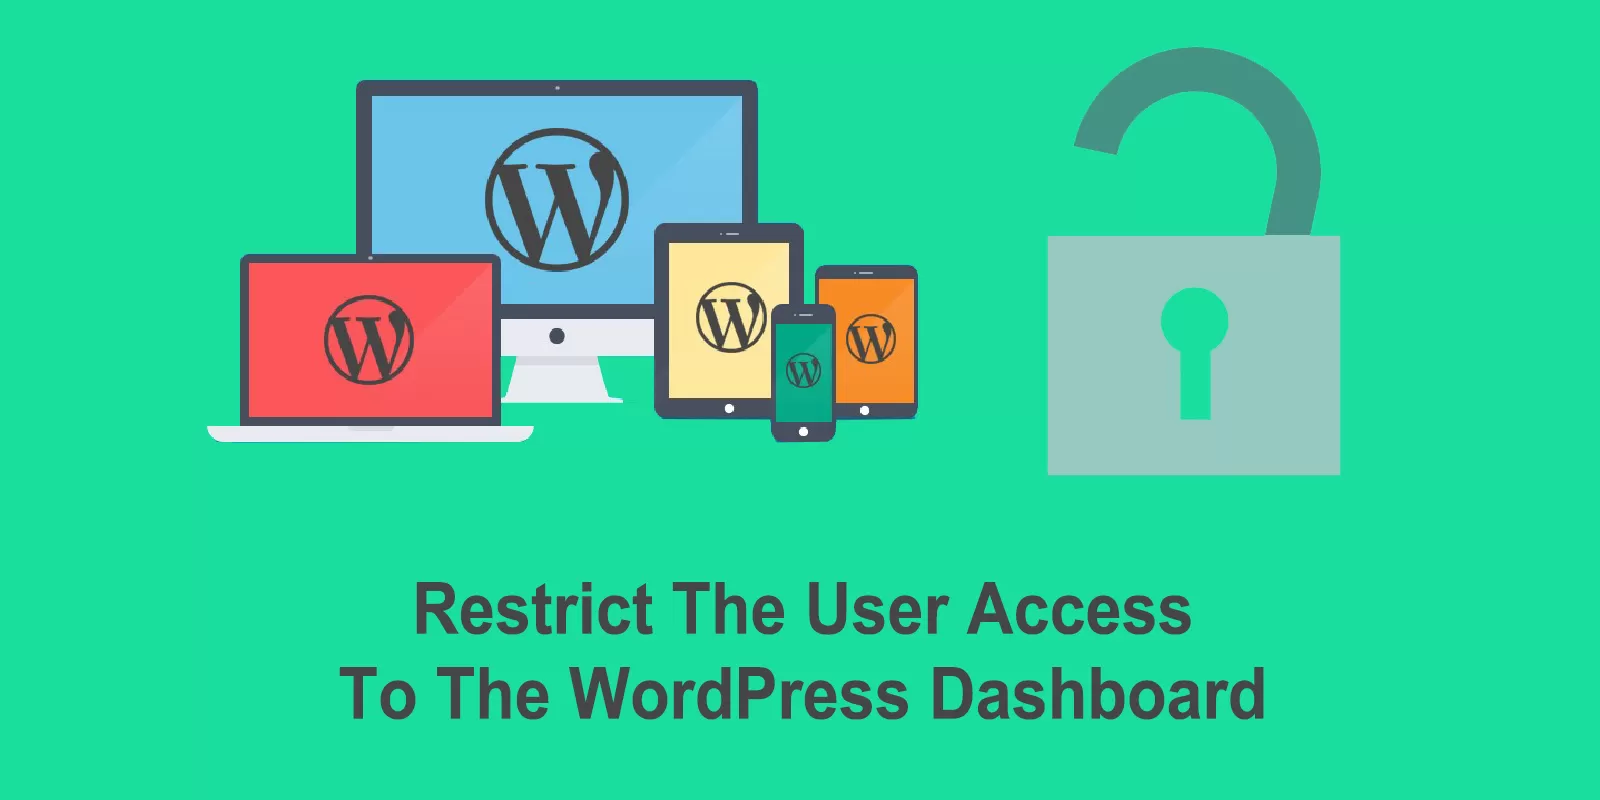 How To Restrict Users To Access The WordPress Dashboard?